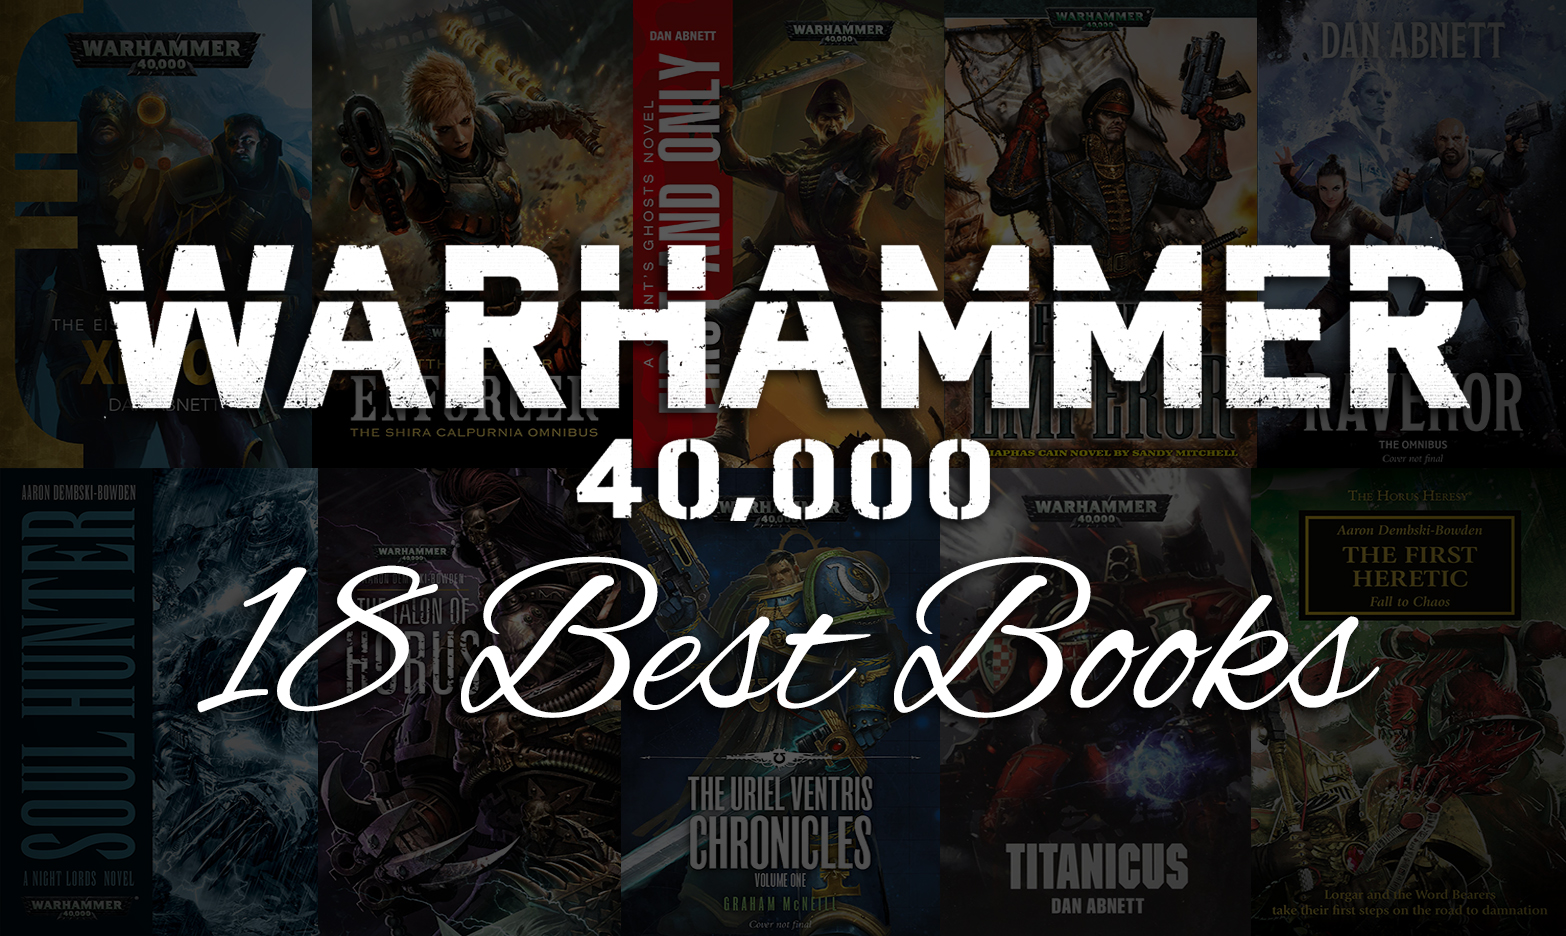 The Ultimate Guide to Warhammer 40k Books: A Definitive Reading Companion